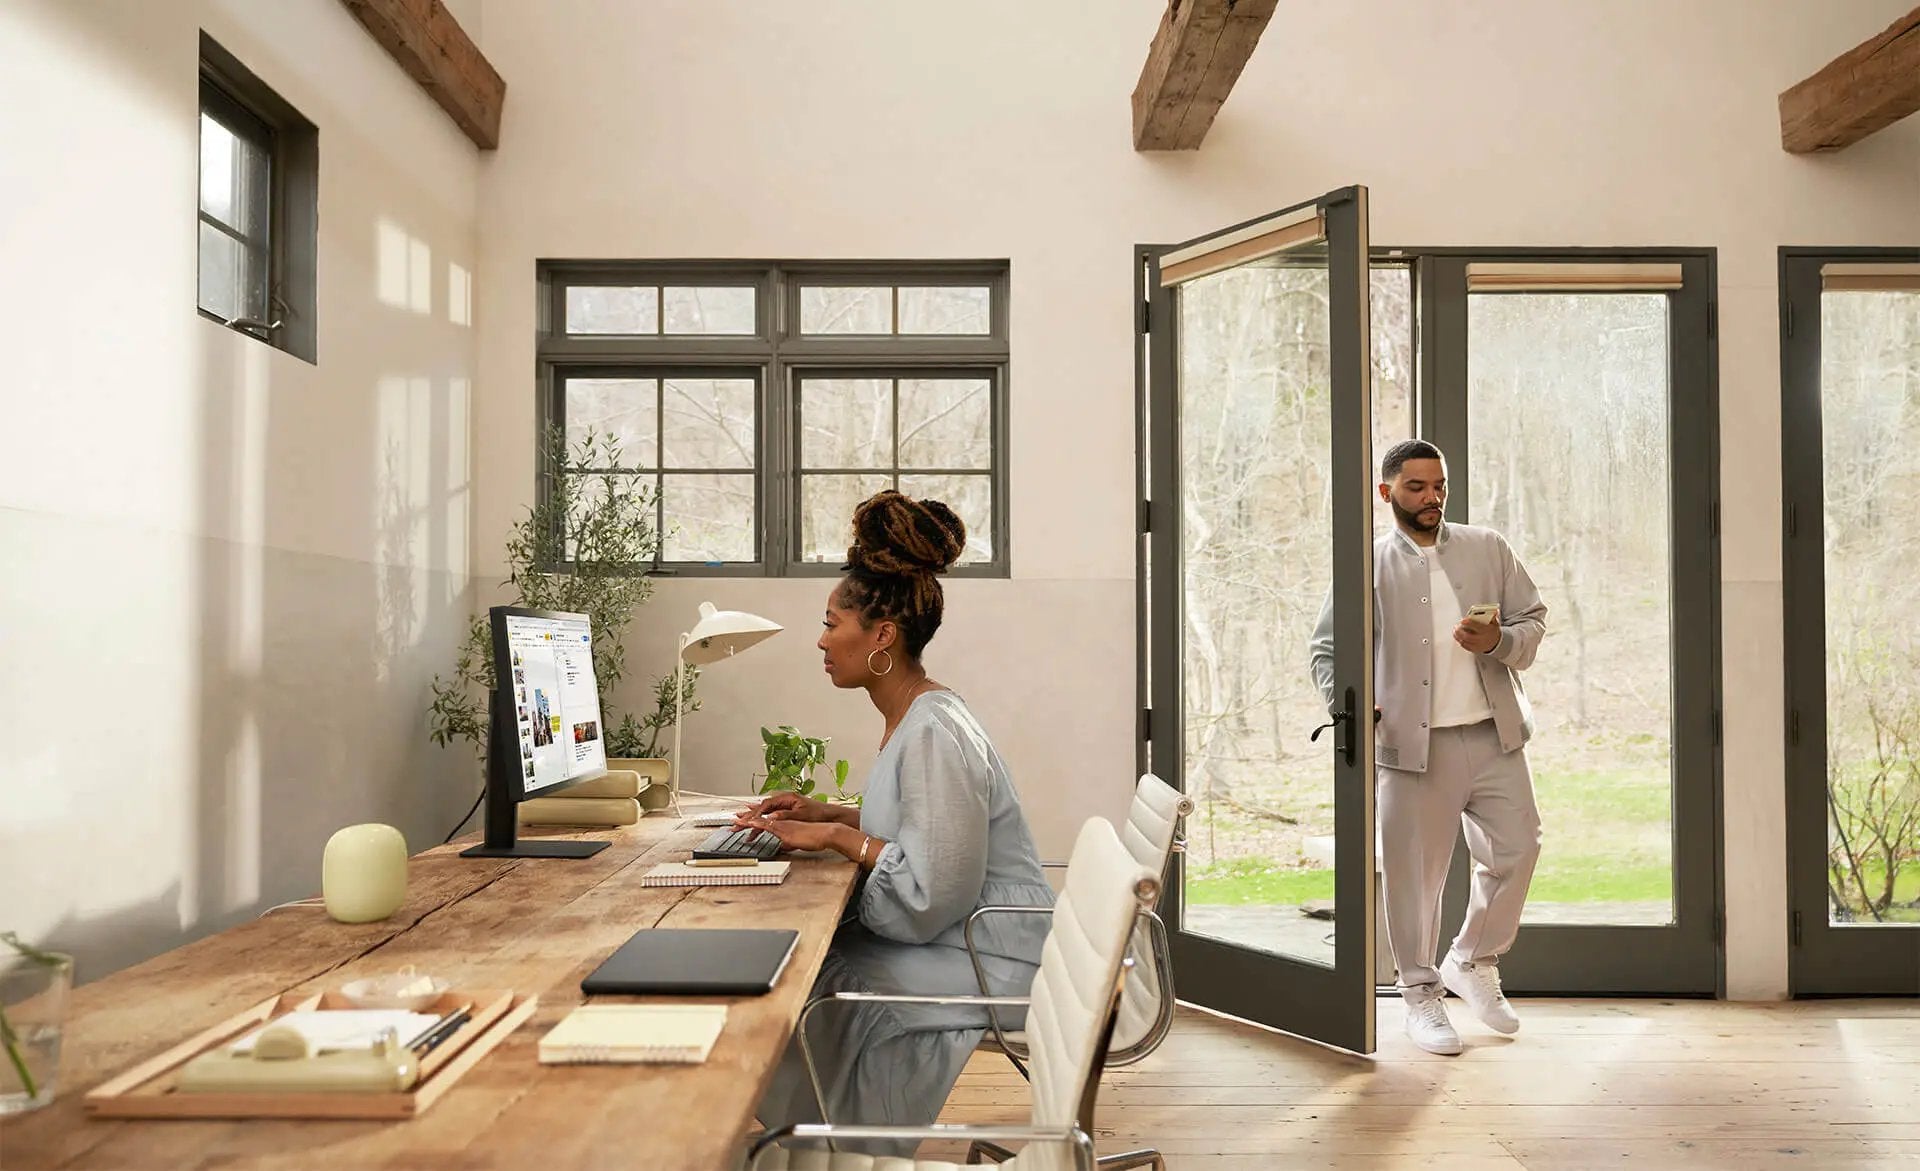 A man entering a home office while a woman works at her desk.